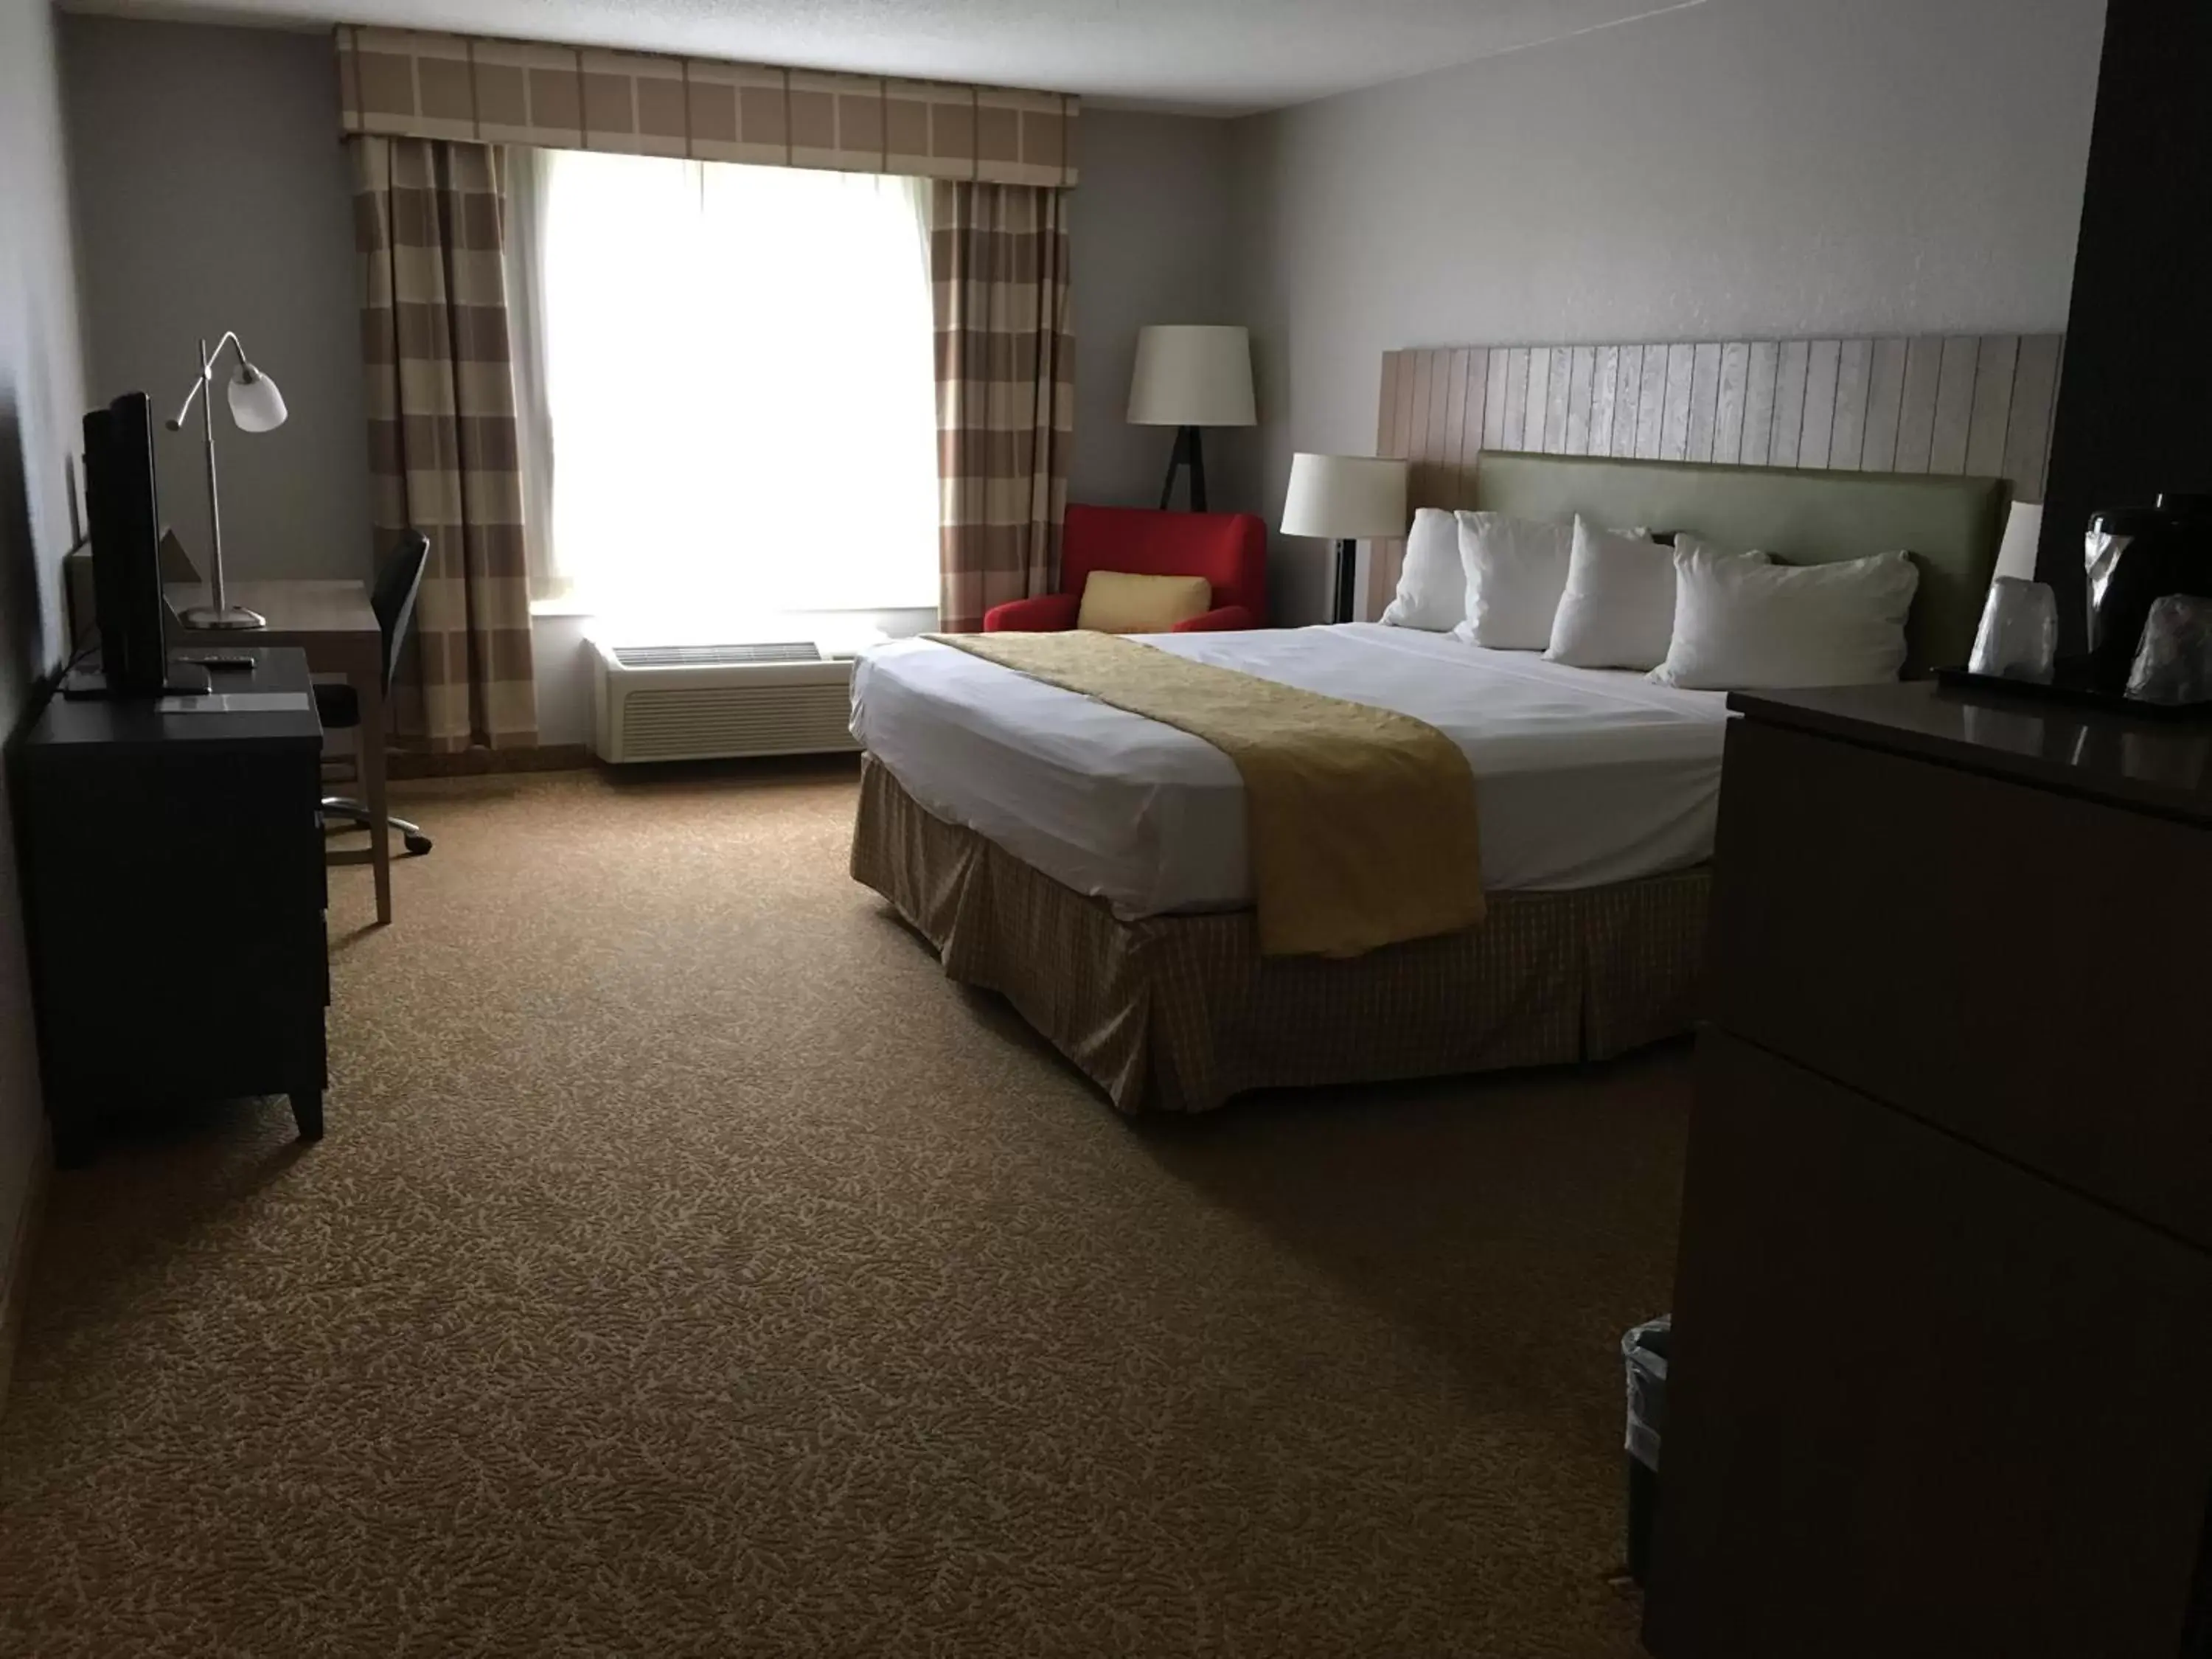 Bed in Country Inn & Suites by Radisson, Minneapolis/Shakopee, MN